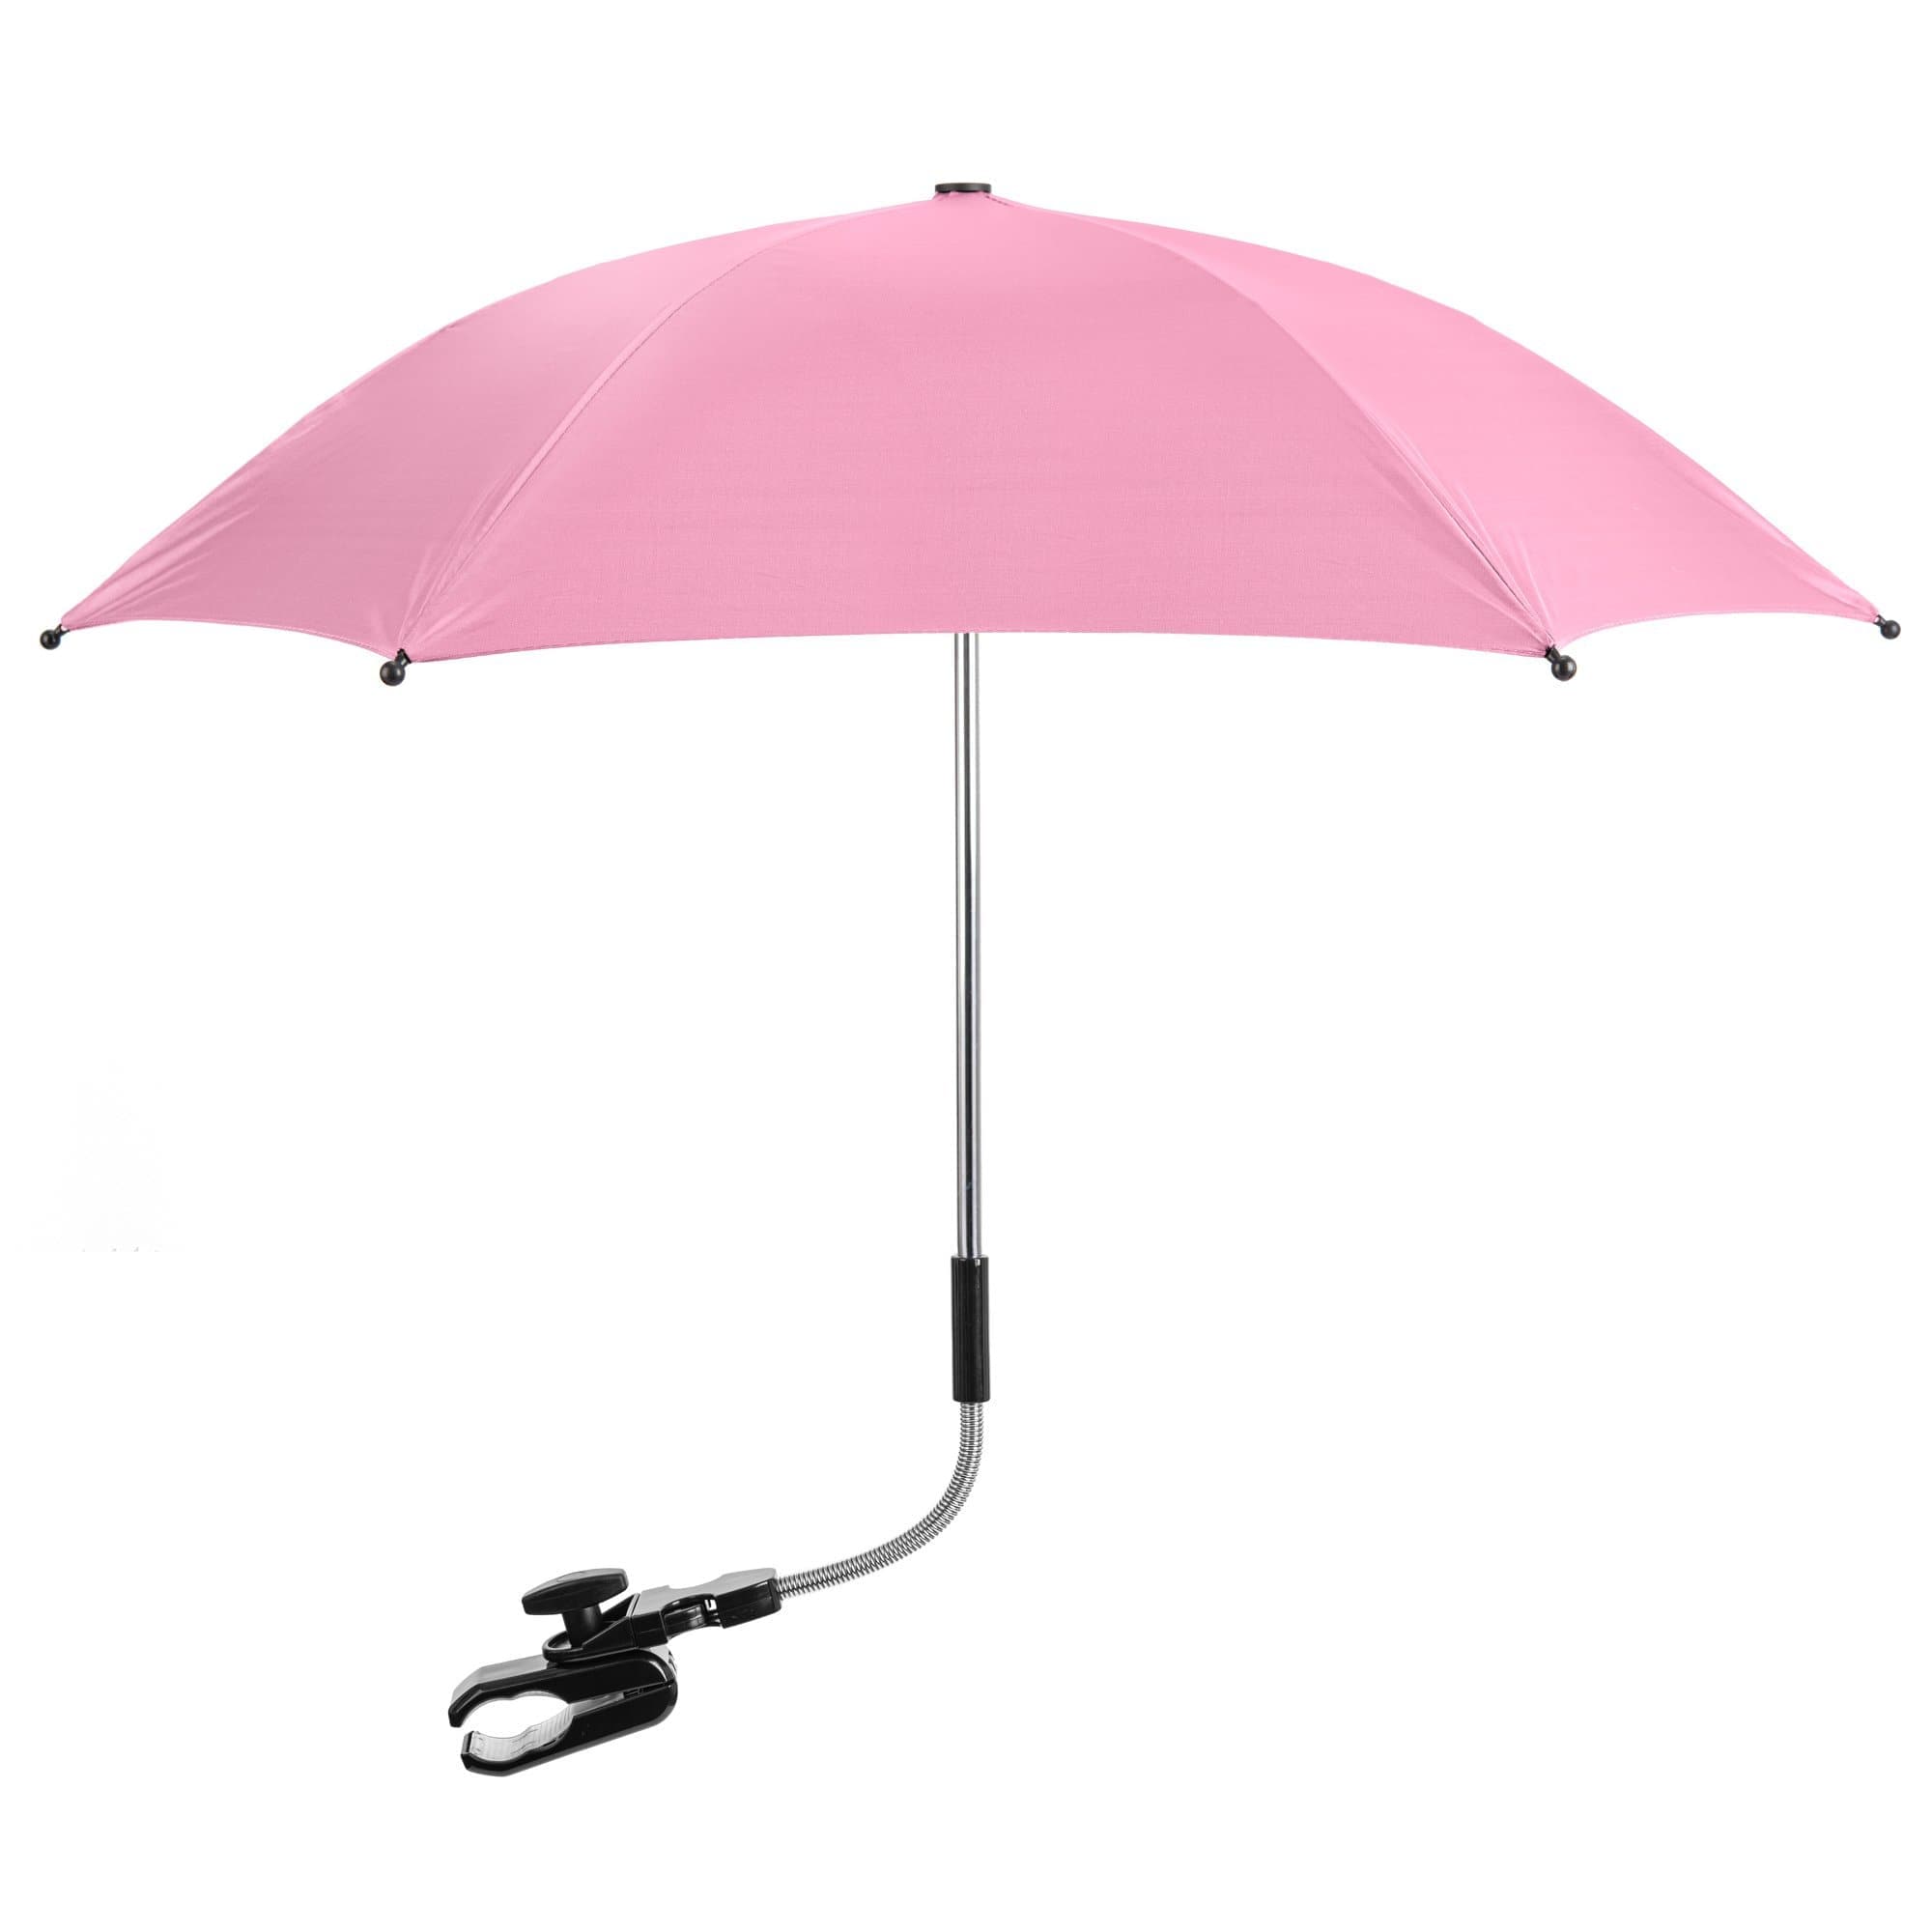 Baby Parasol Compatible With Kiddicare - Fits All Models - For Your Little One